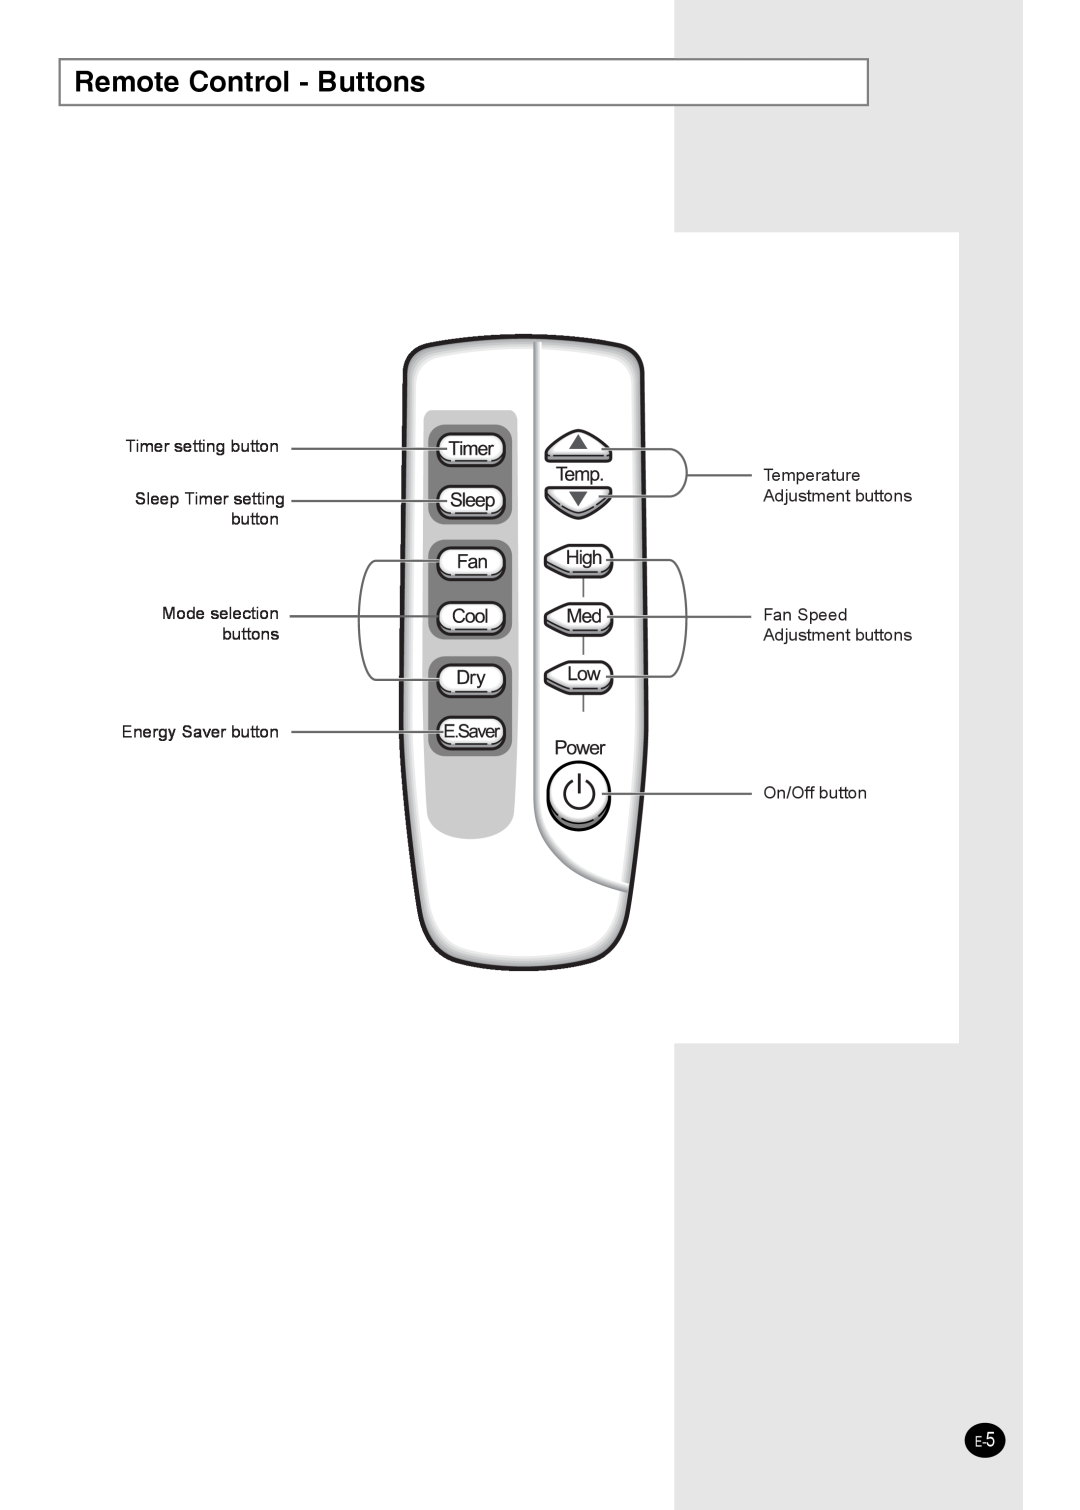 Samsung AW25ECB7 Remote Control - Buttons, Timer setting button Sleep Timer setting button, Temperature Adjustment buttons 